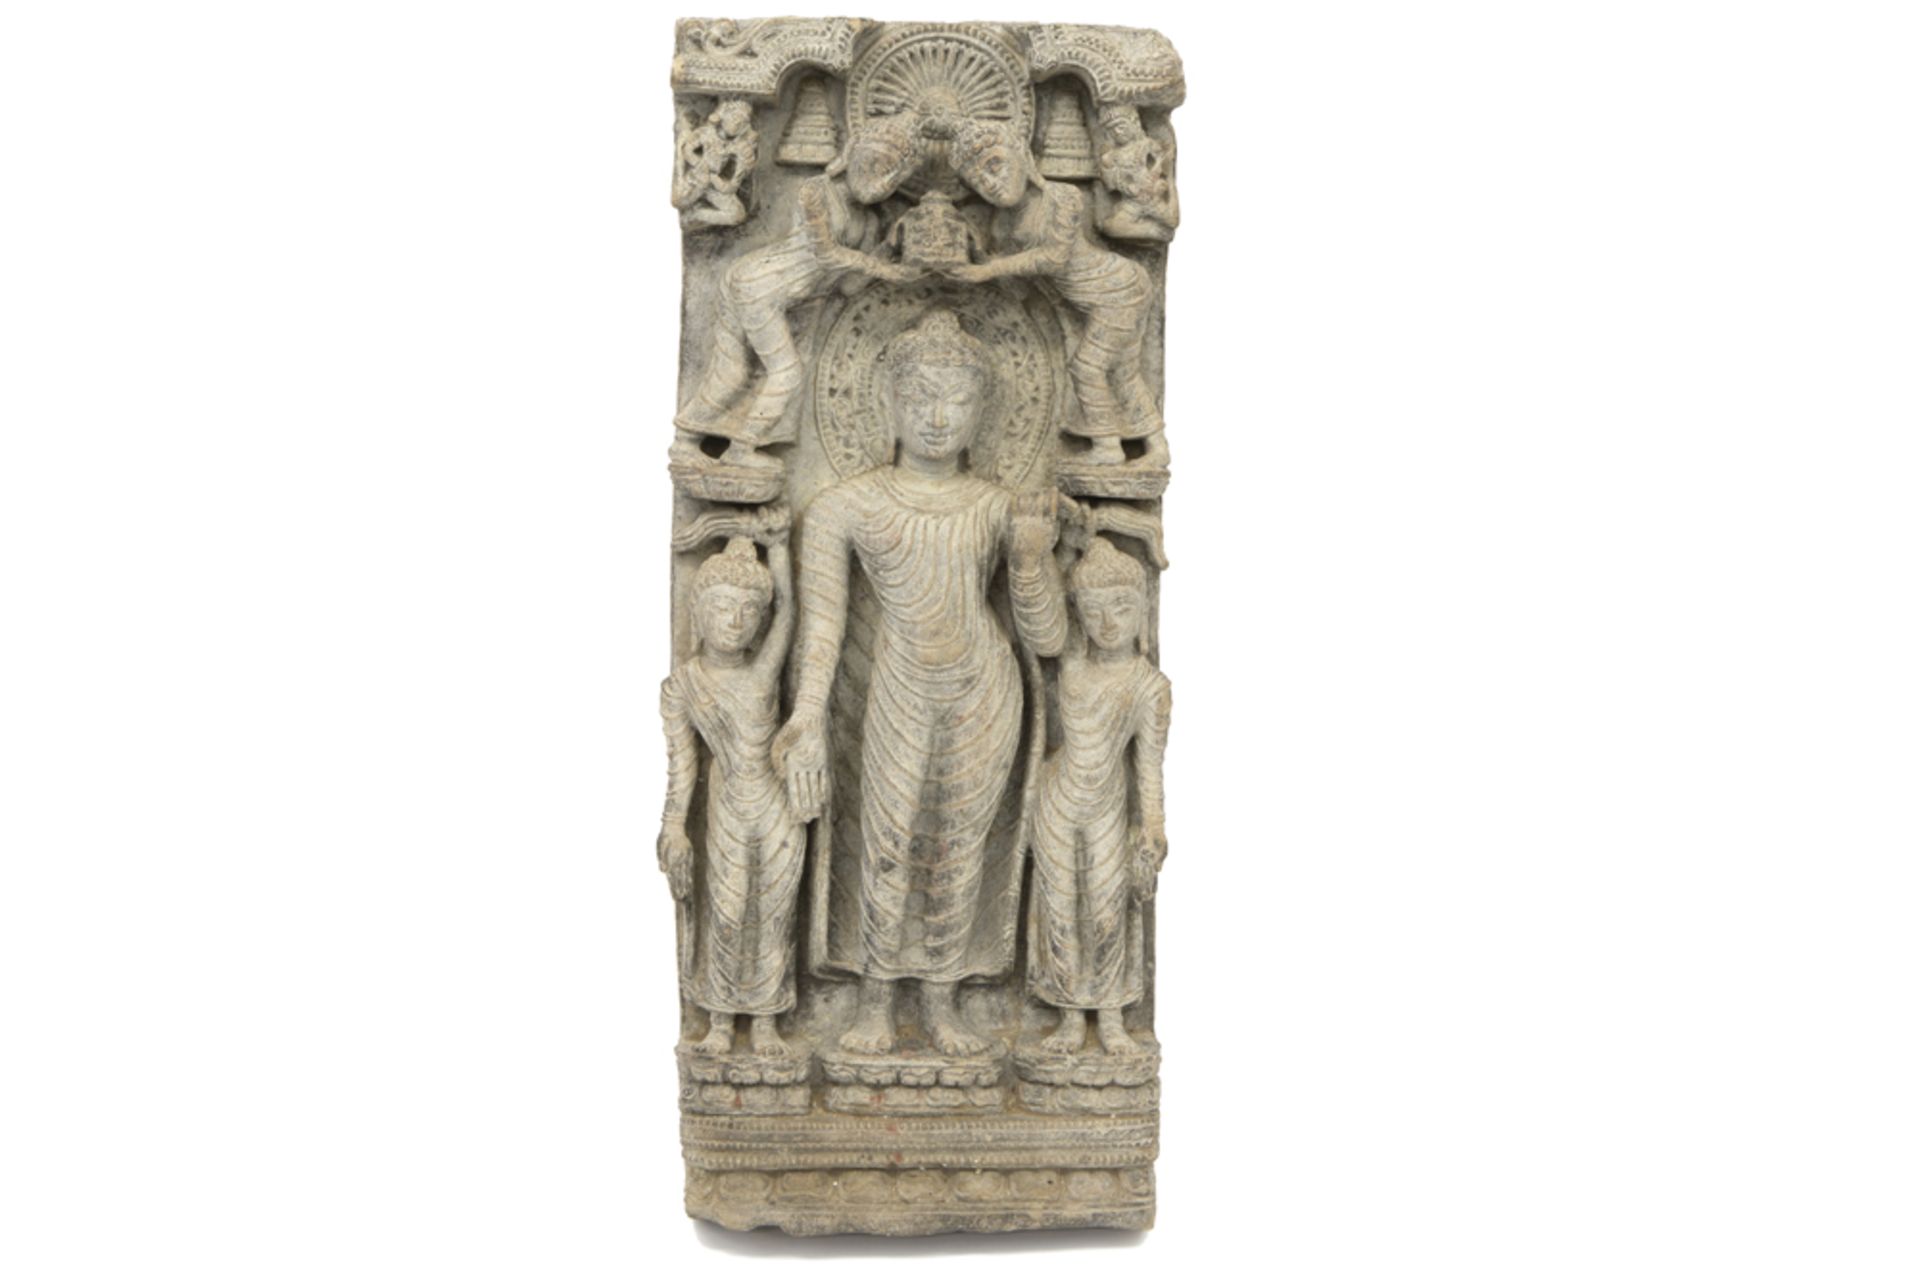 rare 10th Cent. North Indian "Buddha" sculpture (probaly from the Bihar regio) in schist This is the